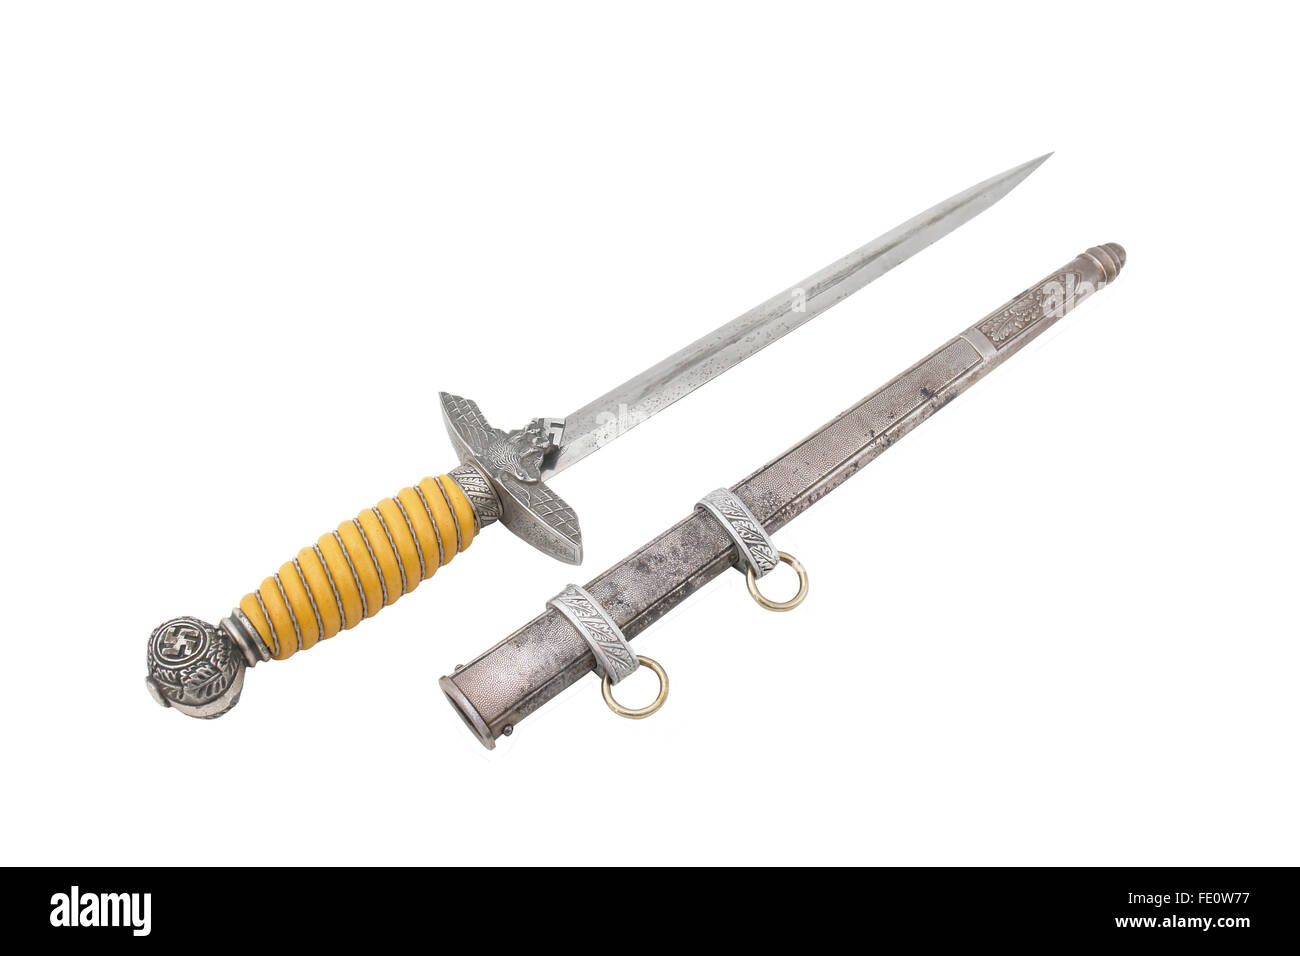 Germany in the WW2. Standard dirk (dagger) of German officer (Luftwaffe) with scabbard. Stock Photo